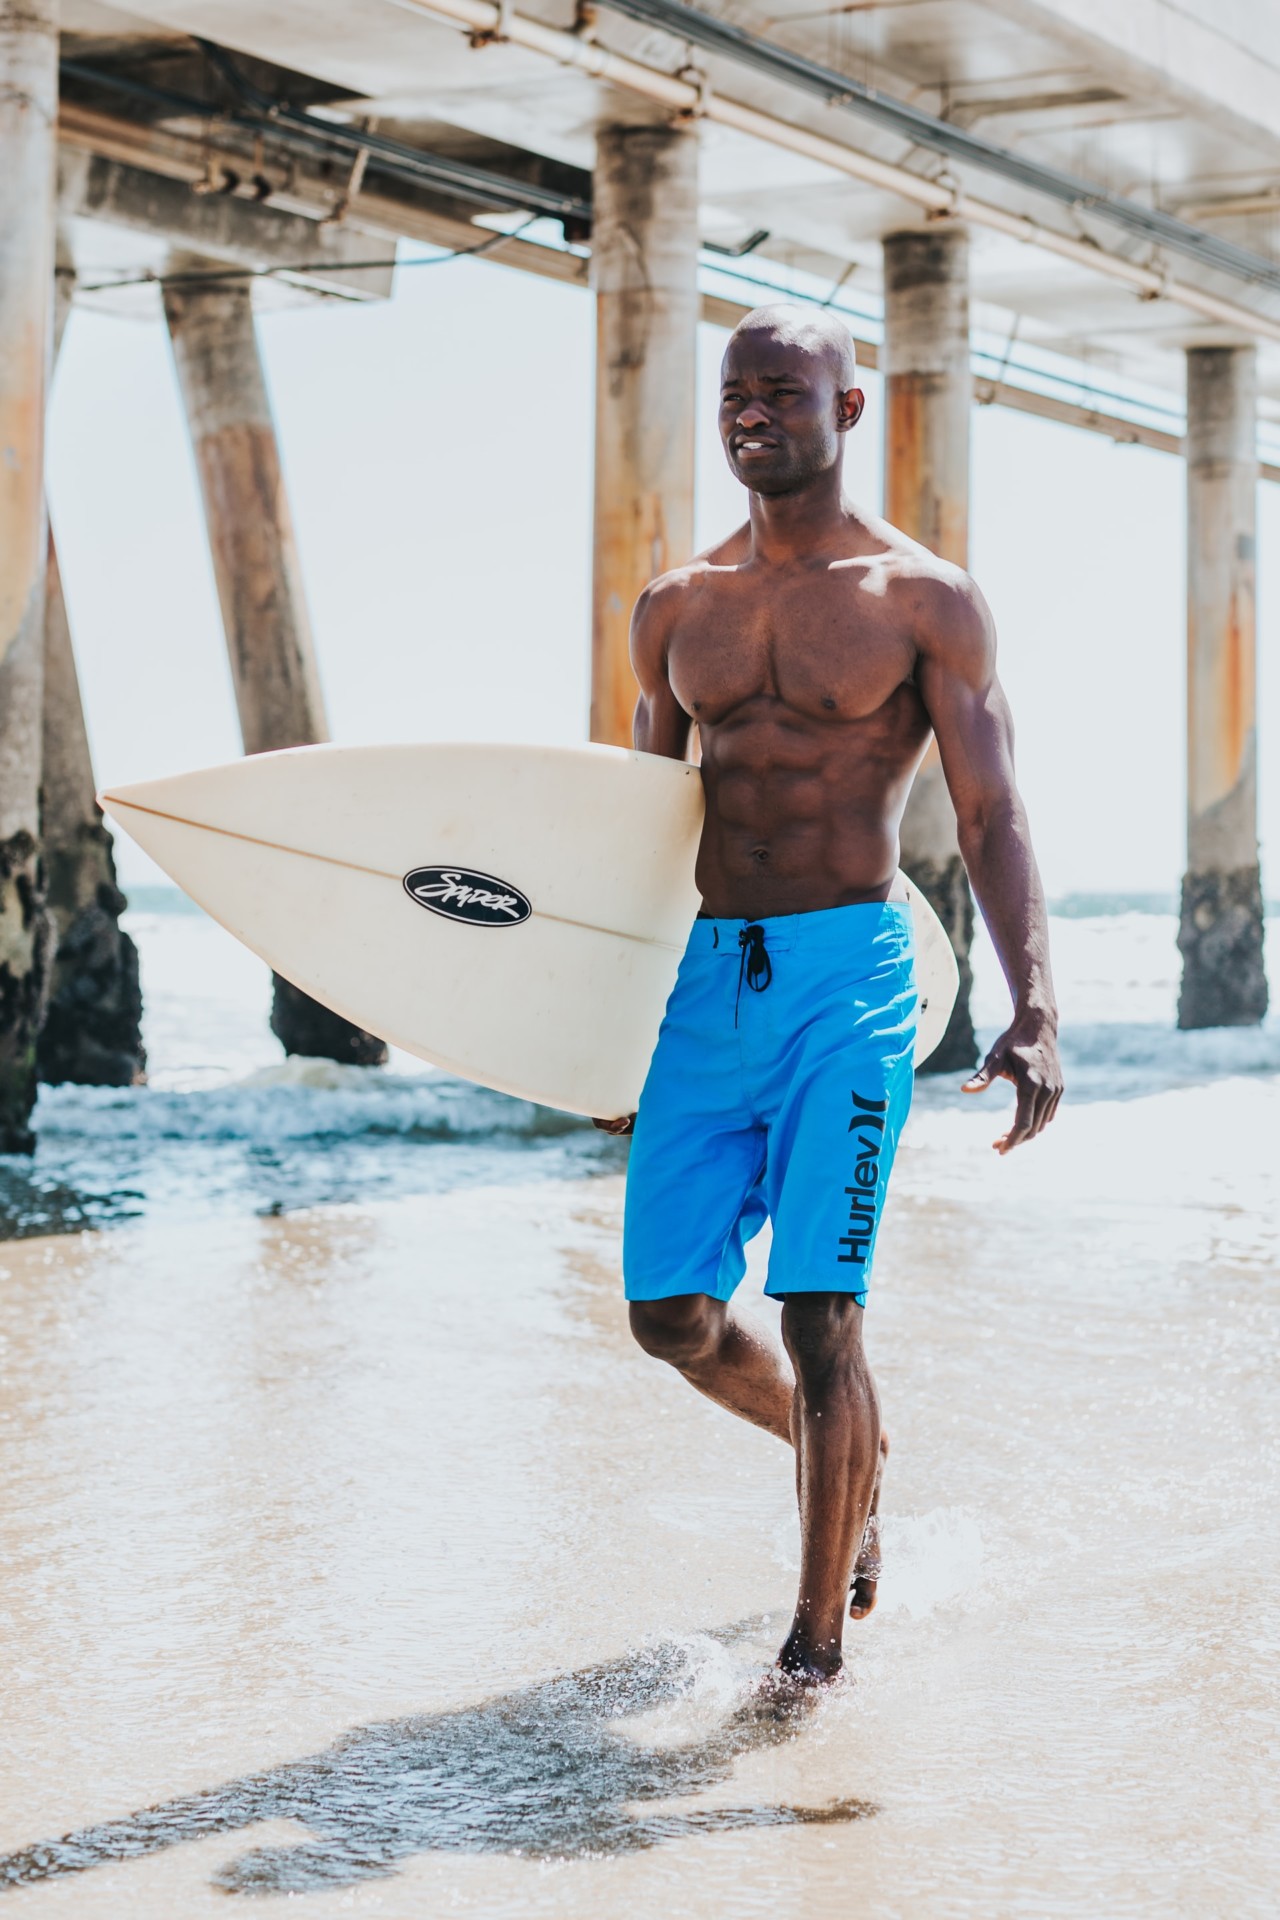 Do Surfers Go to the Gym? (6 Ways It Could Benefit You)